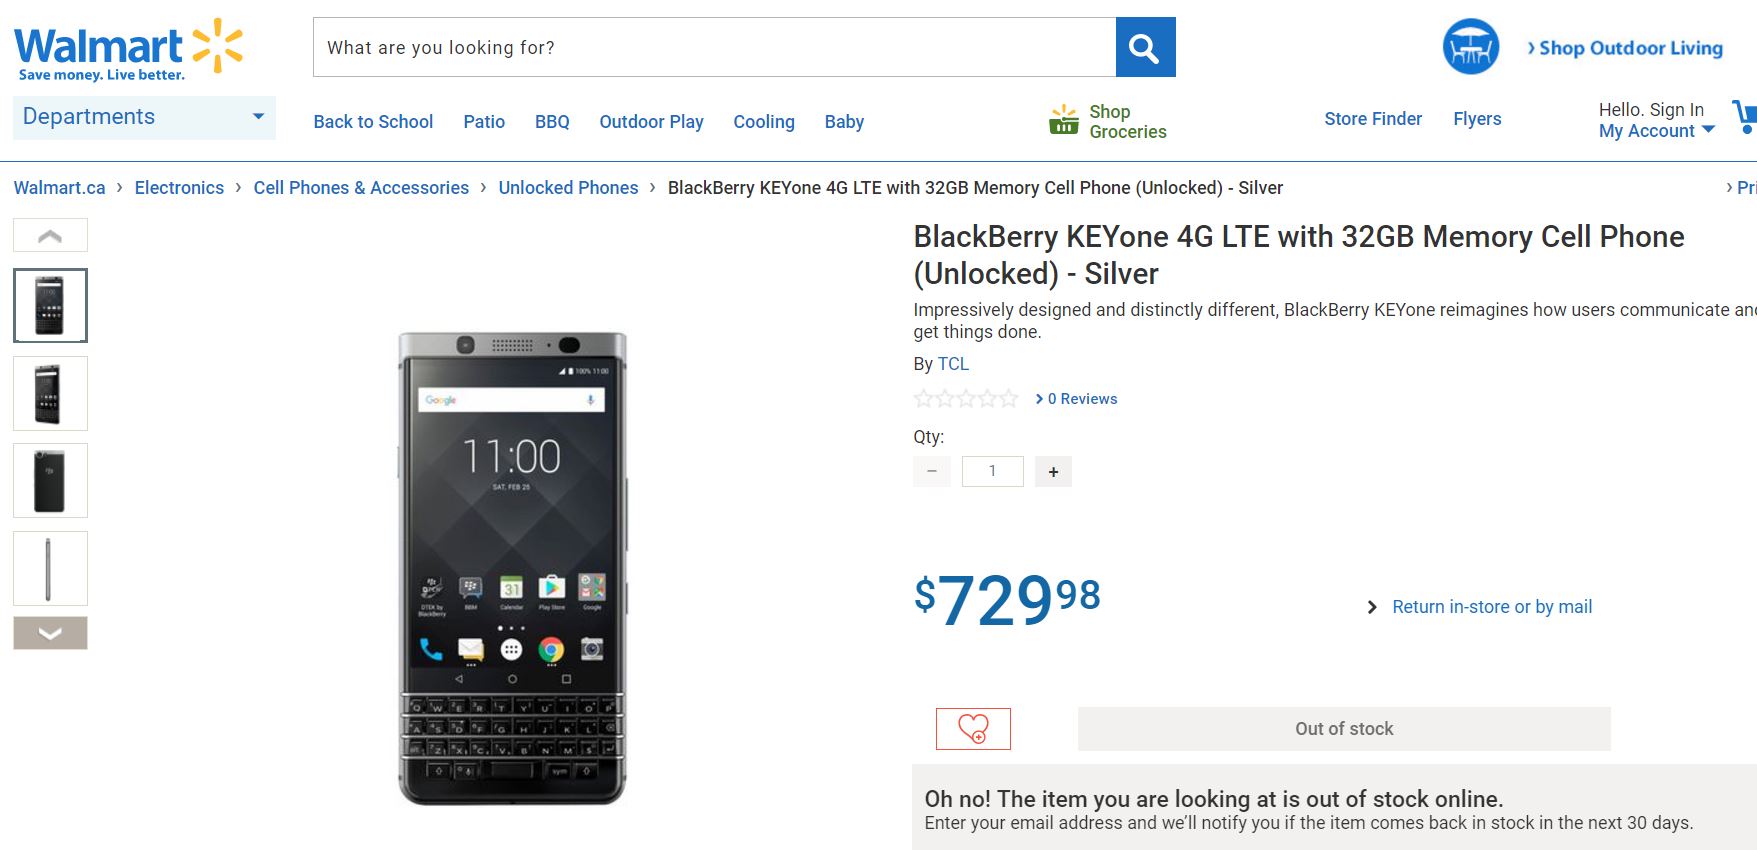 BlackBerry KEYone Unlocked variant now available to buy from Walmart in Canada 1